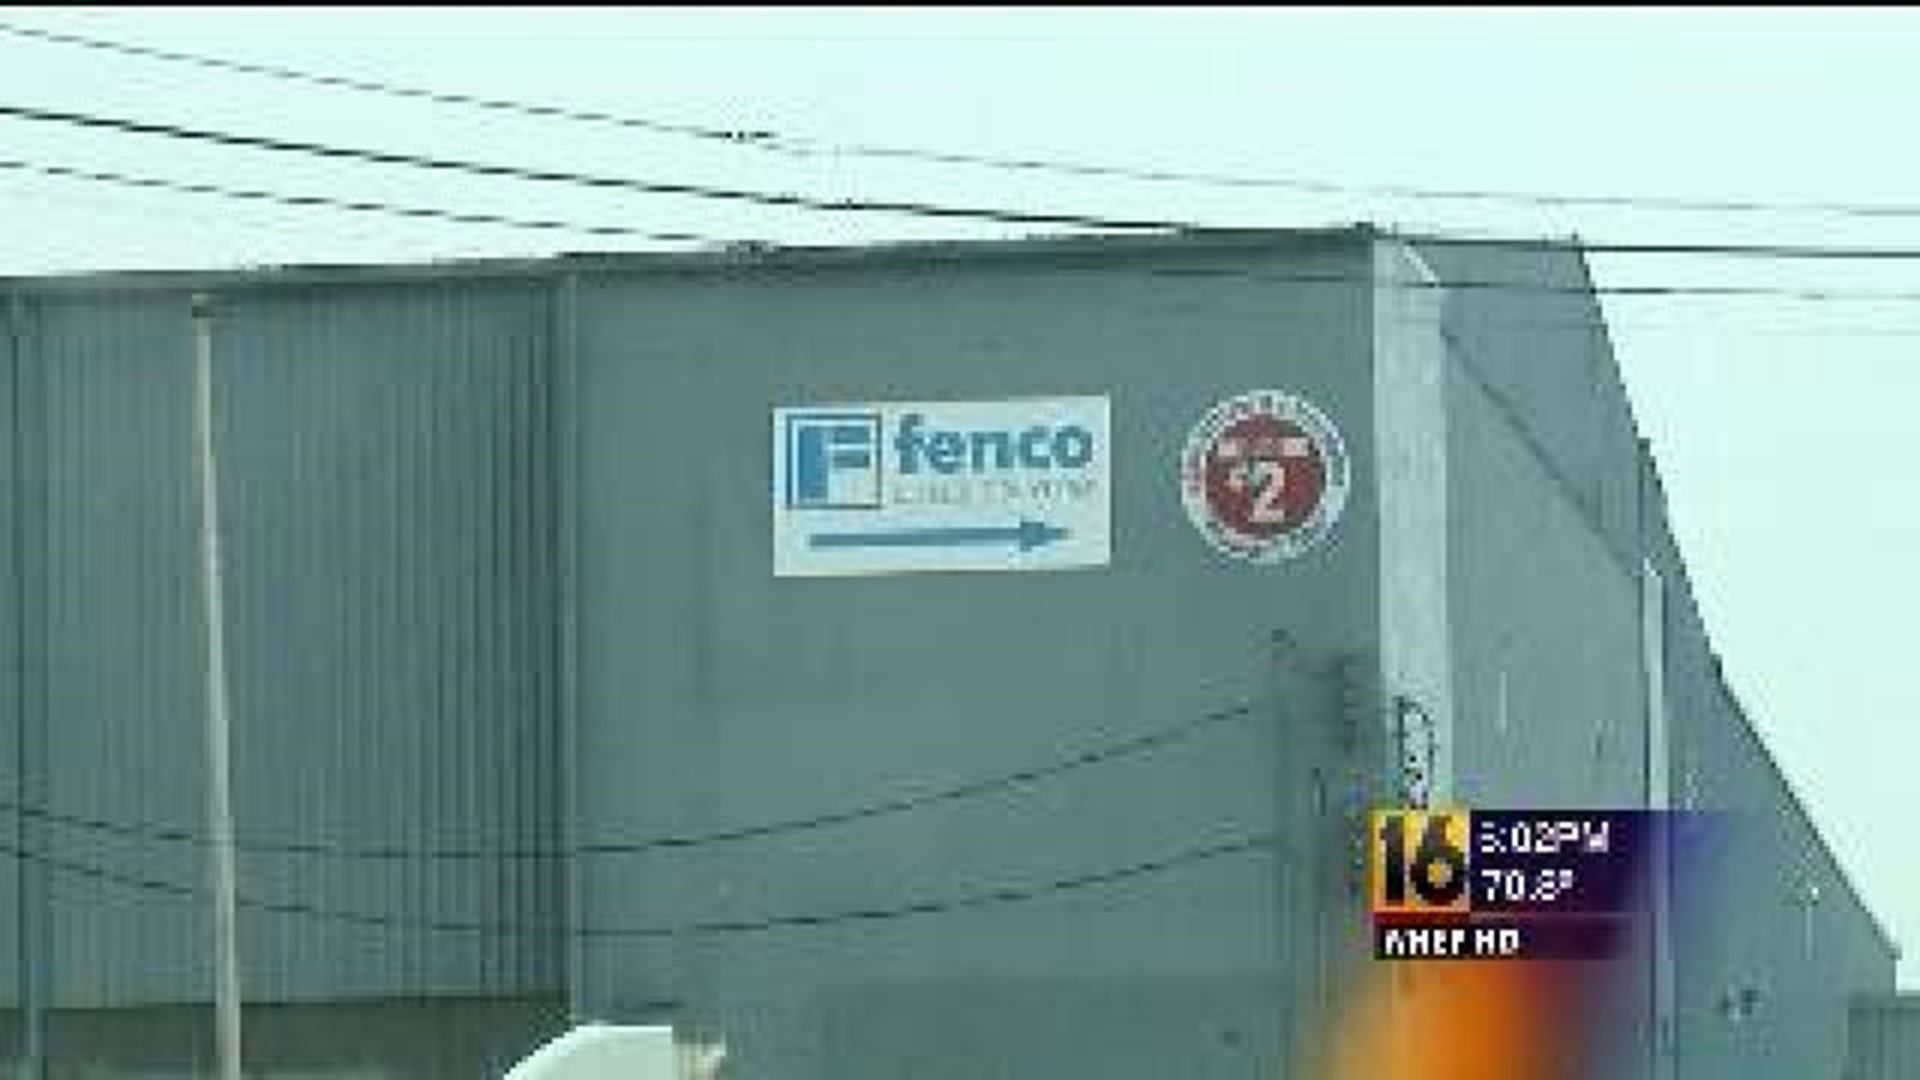 Two Plants Close, Workers Laid Off